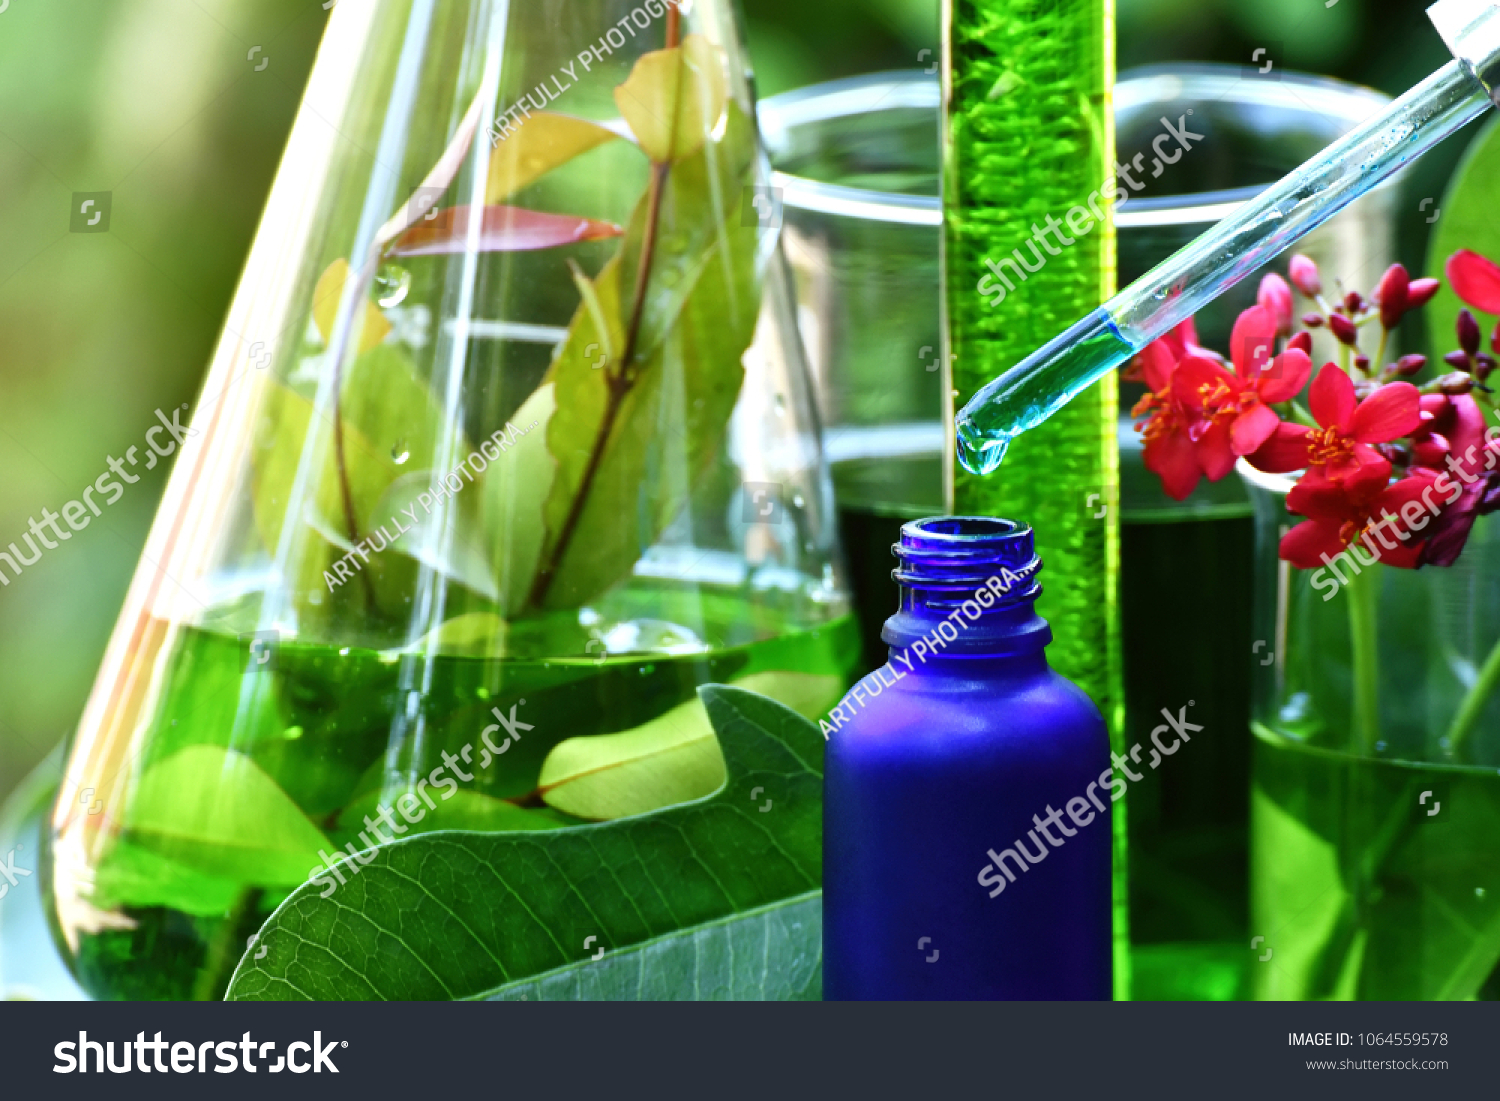 Scientist with natural drug research, Natural organic botany and scientific glassware, Alternative green herb medicine, Natural skin care beauty products, Research and development concept. #1064559578